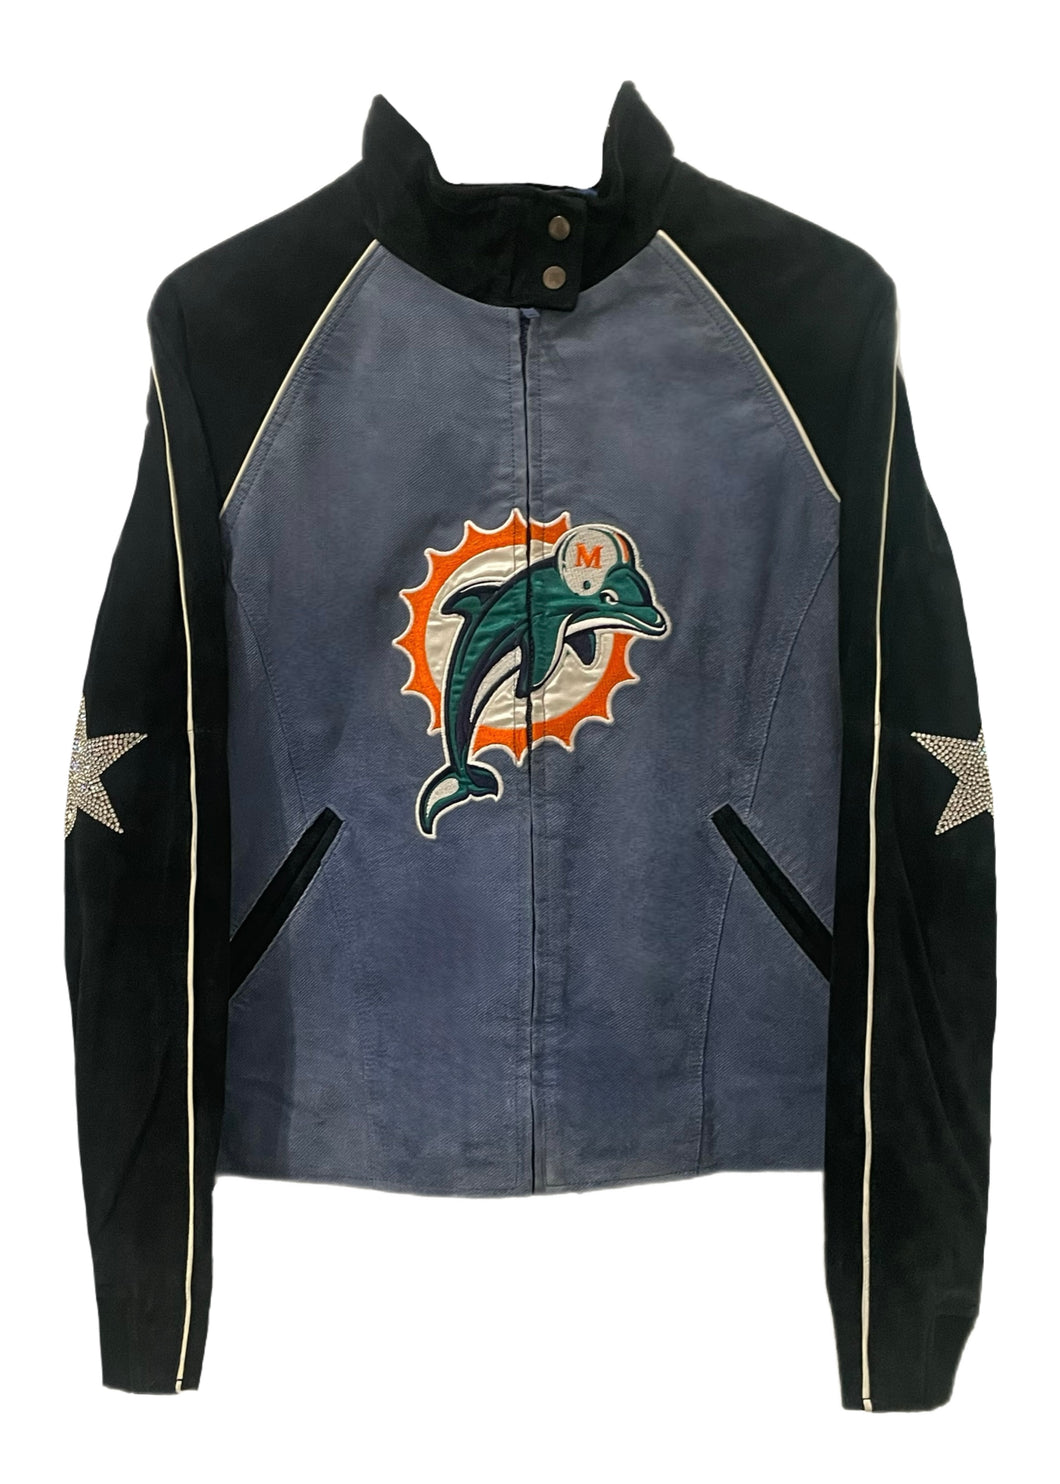 Miami Dolphins, NFL “Rare Find” One of a KIND Vintage Suede Jacket with Crystal Star Design